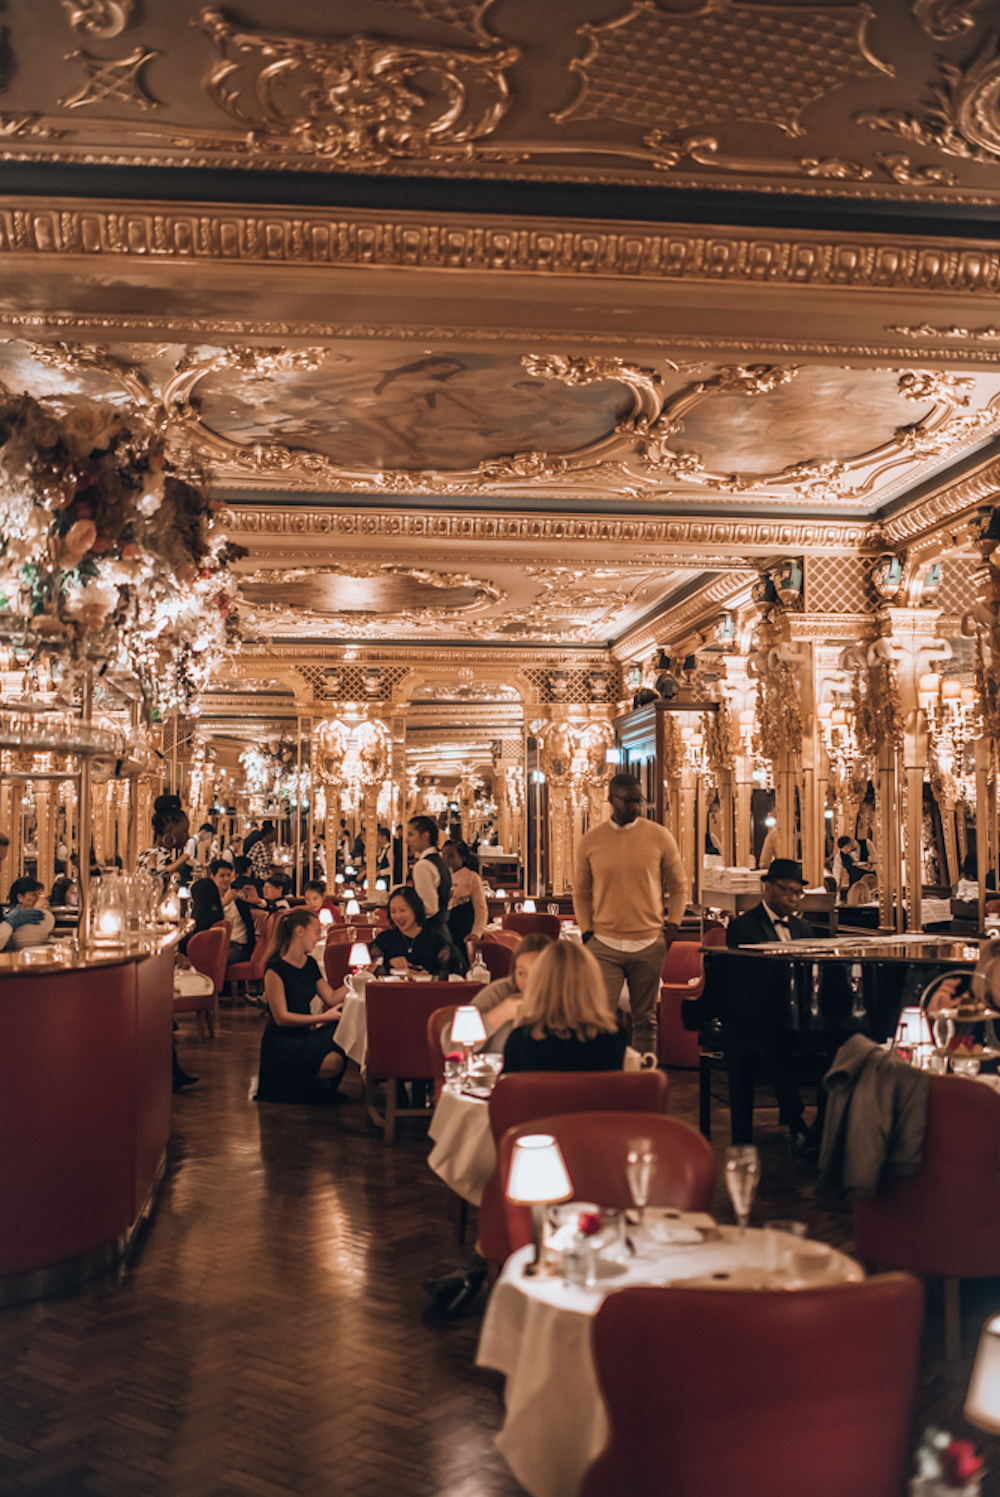 The Queen of Afternoon Teas at Hotel Café Royal - SilverSpoon London